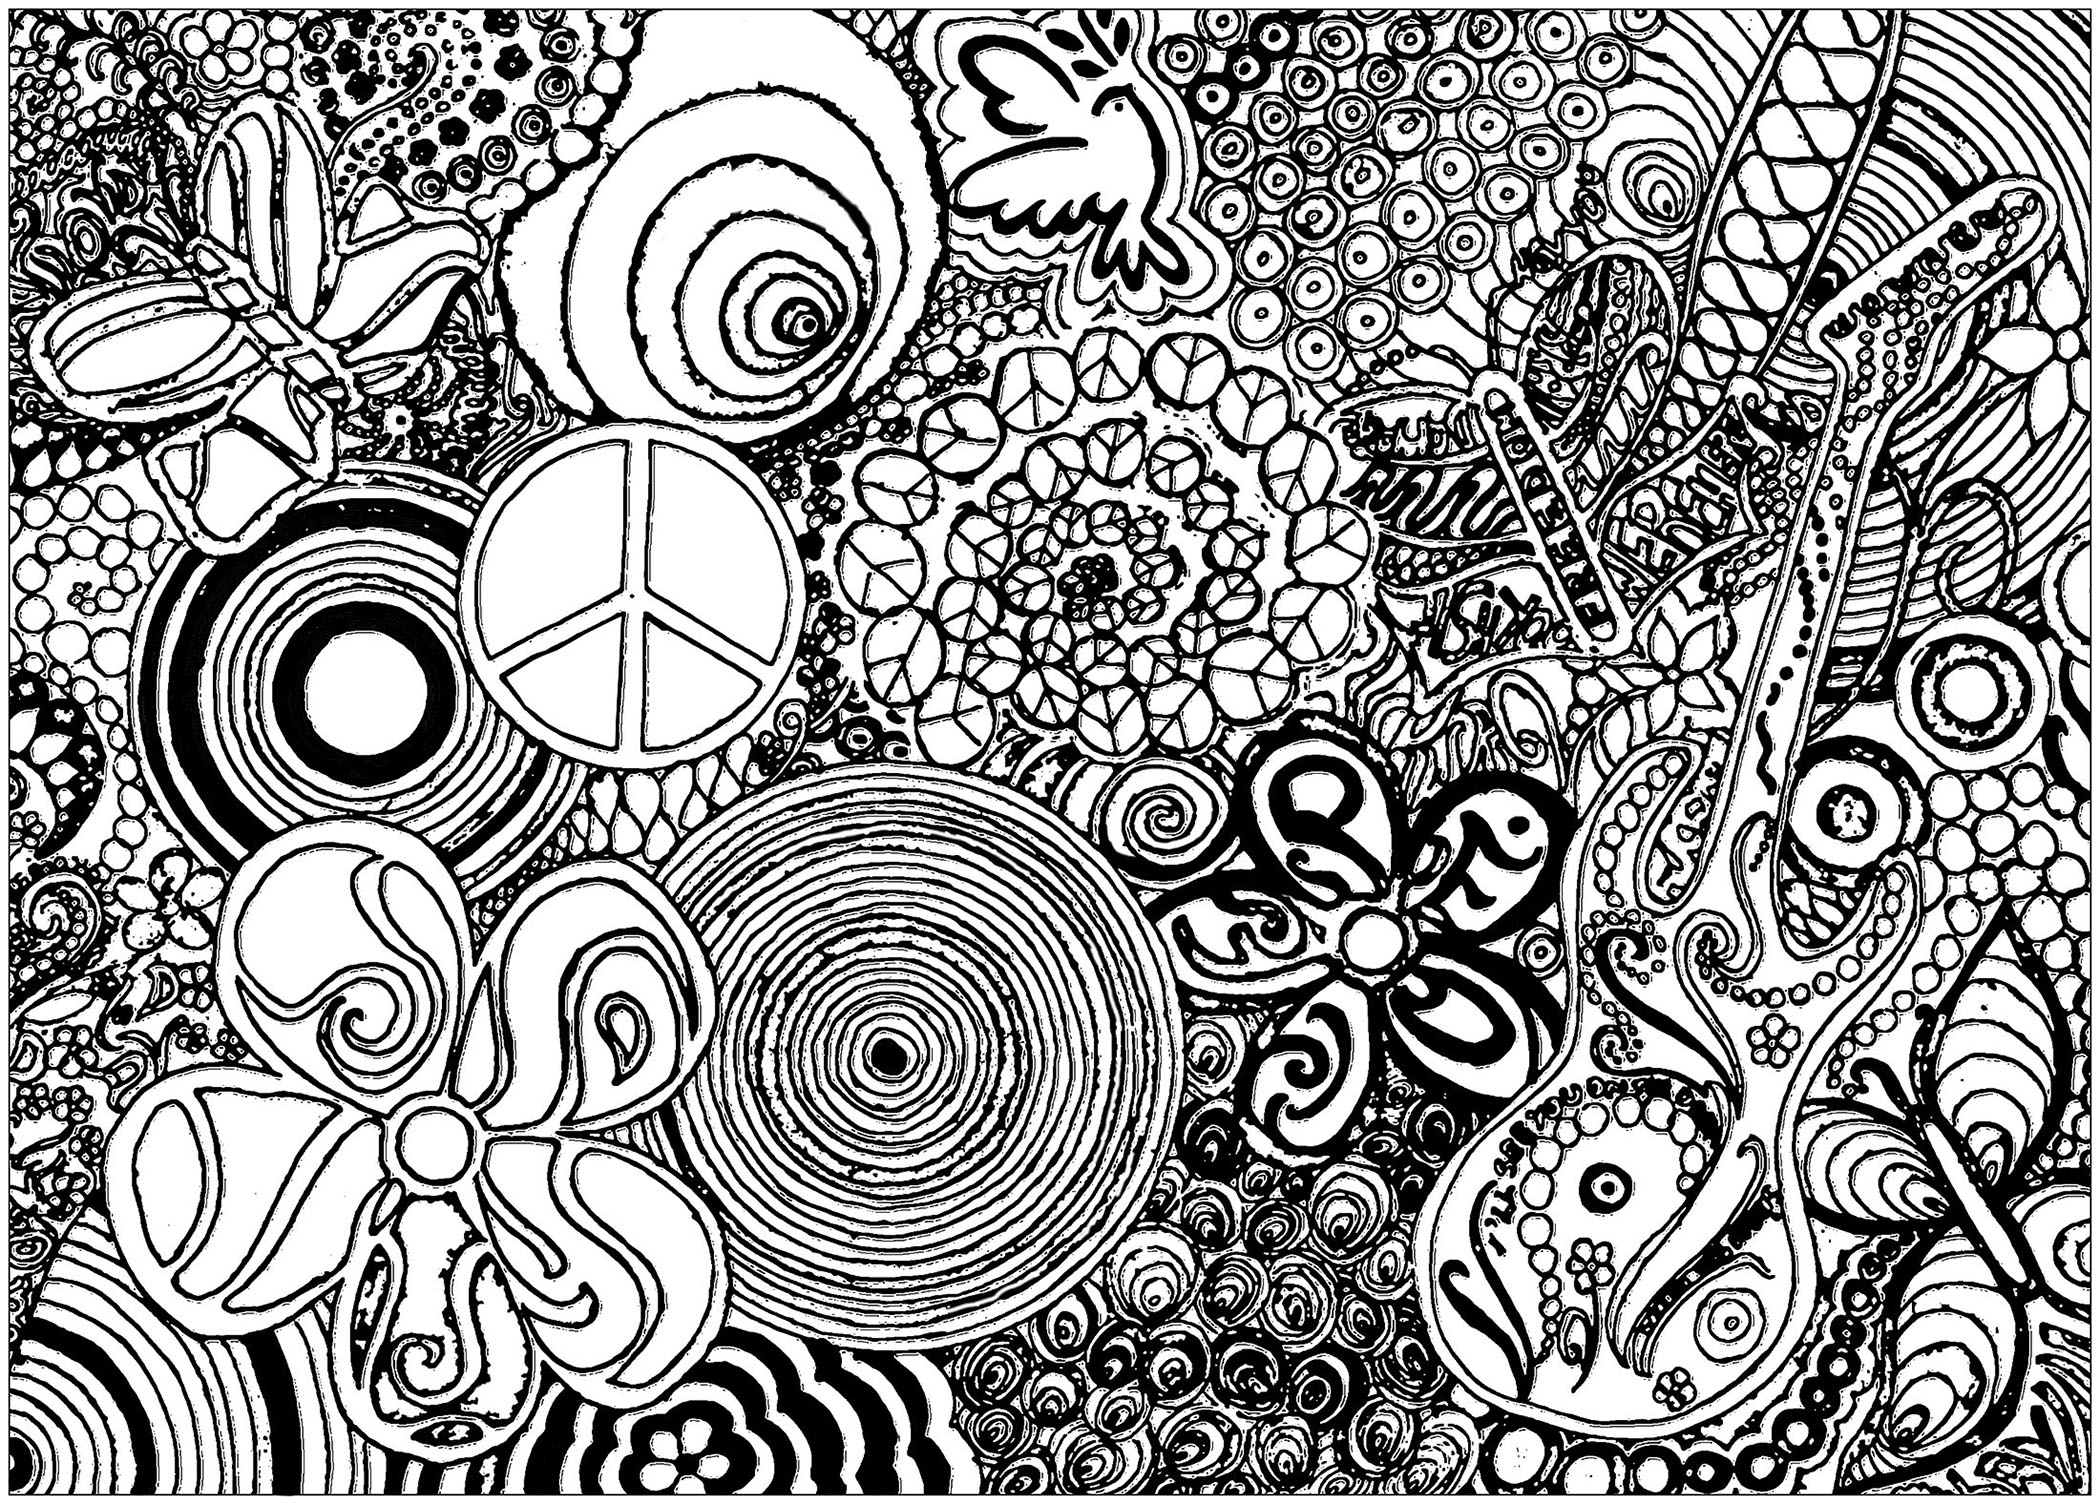 Psychedelic patterns: Color this design and discover symbols related to music and peace. You will discover symbols related to music and peace, and you can lose yourself in the process of coloring and creating. You can feel calm and free, and let your imagination run wild. Let yourself be carried away by this visual journey and let your mind find peace and serenity. This coloring will allow you to reconnect to your soul and spirit and find inner peace.